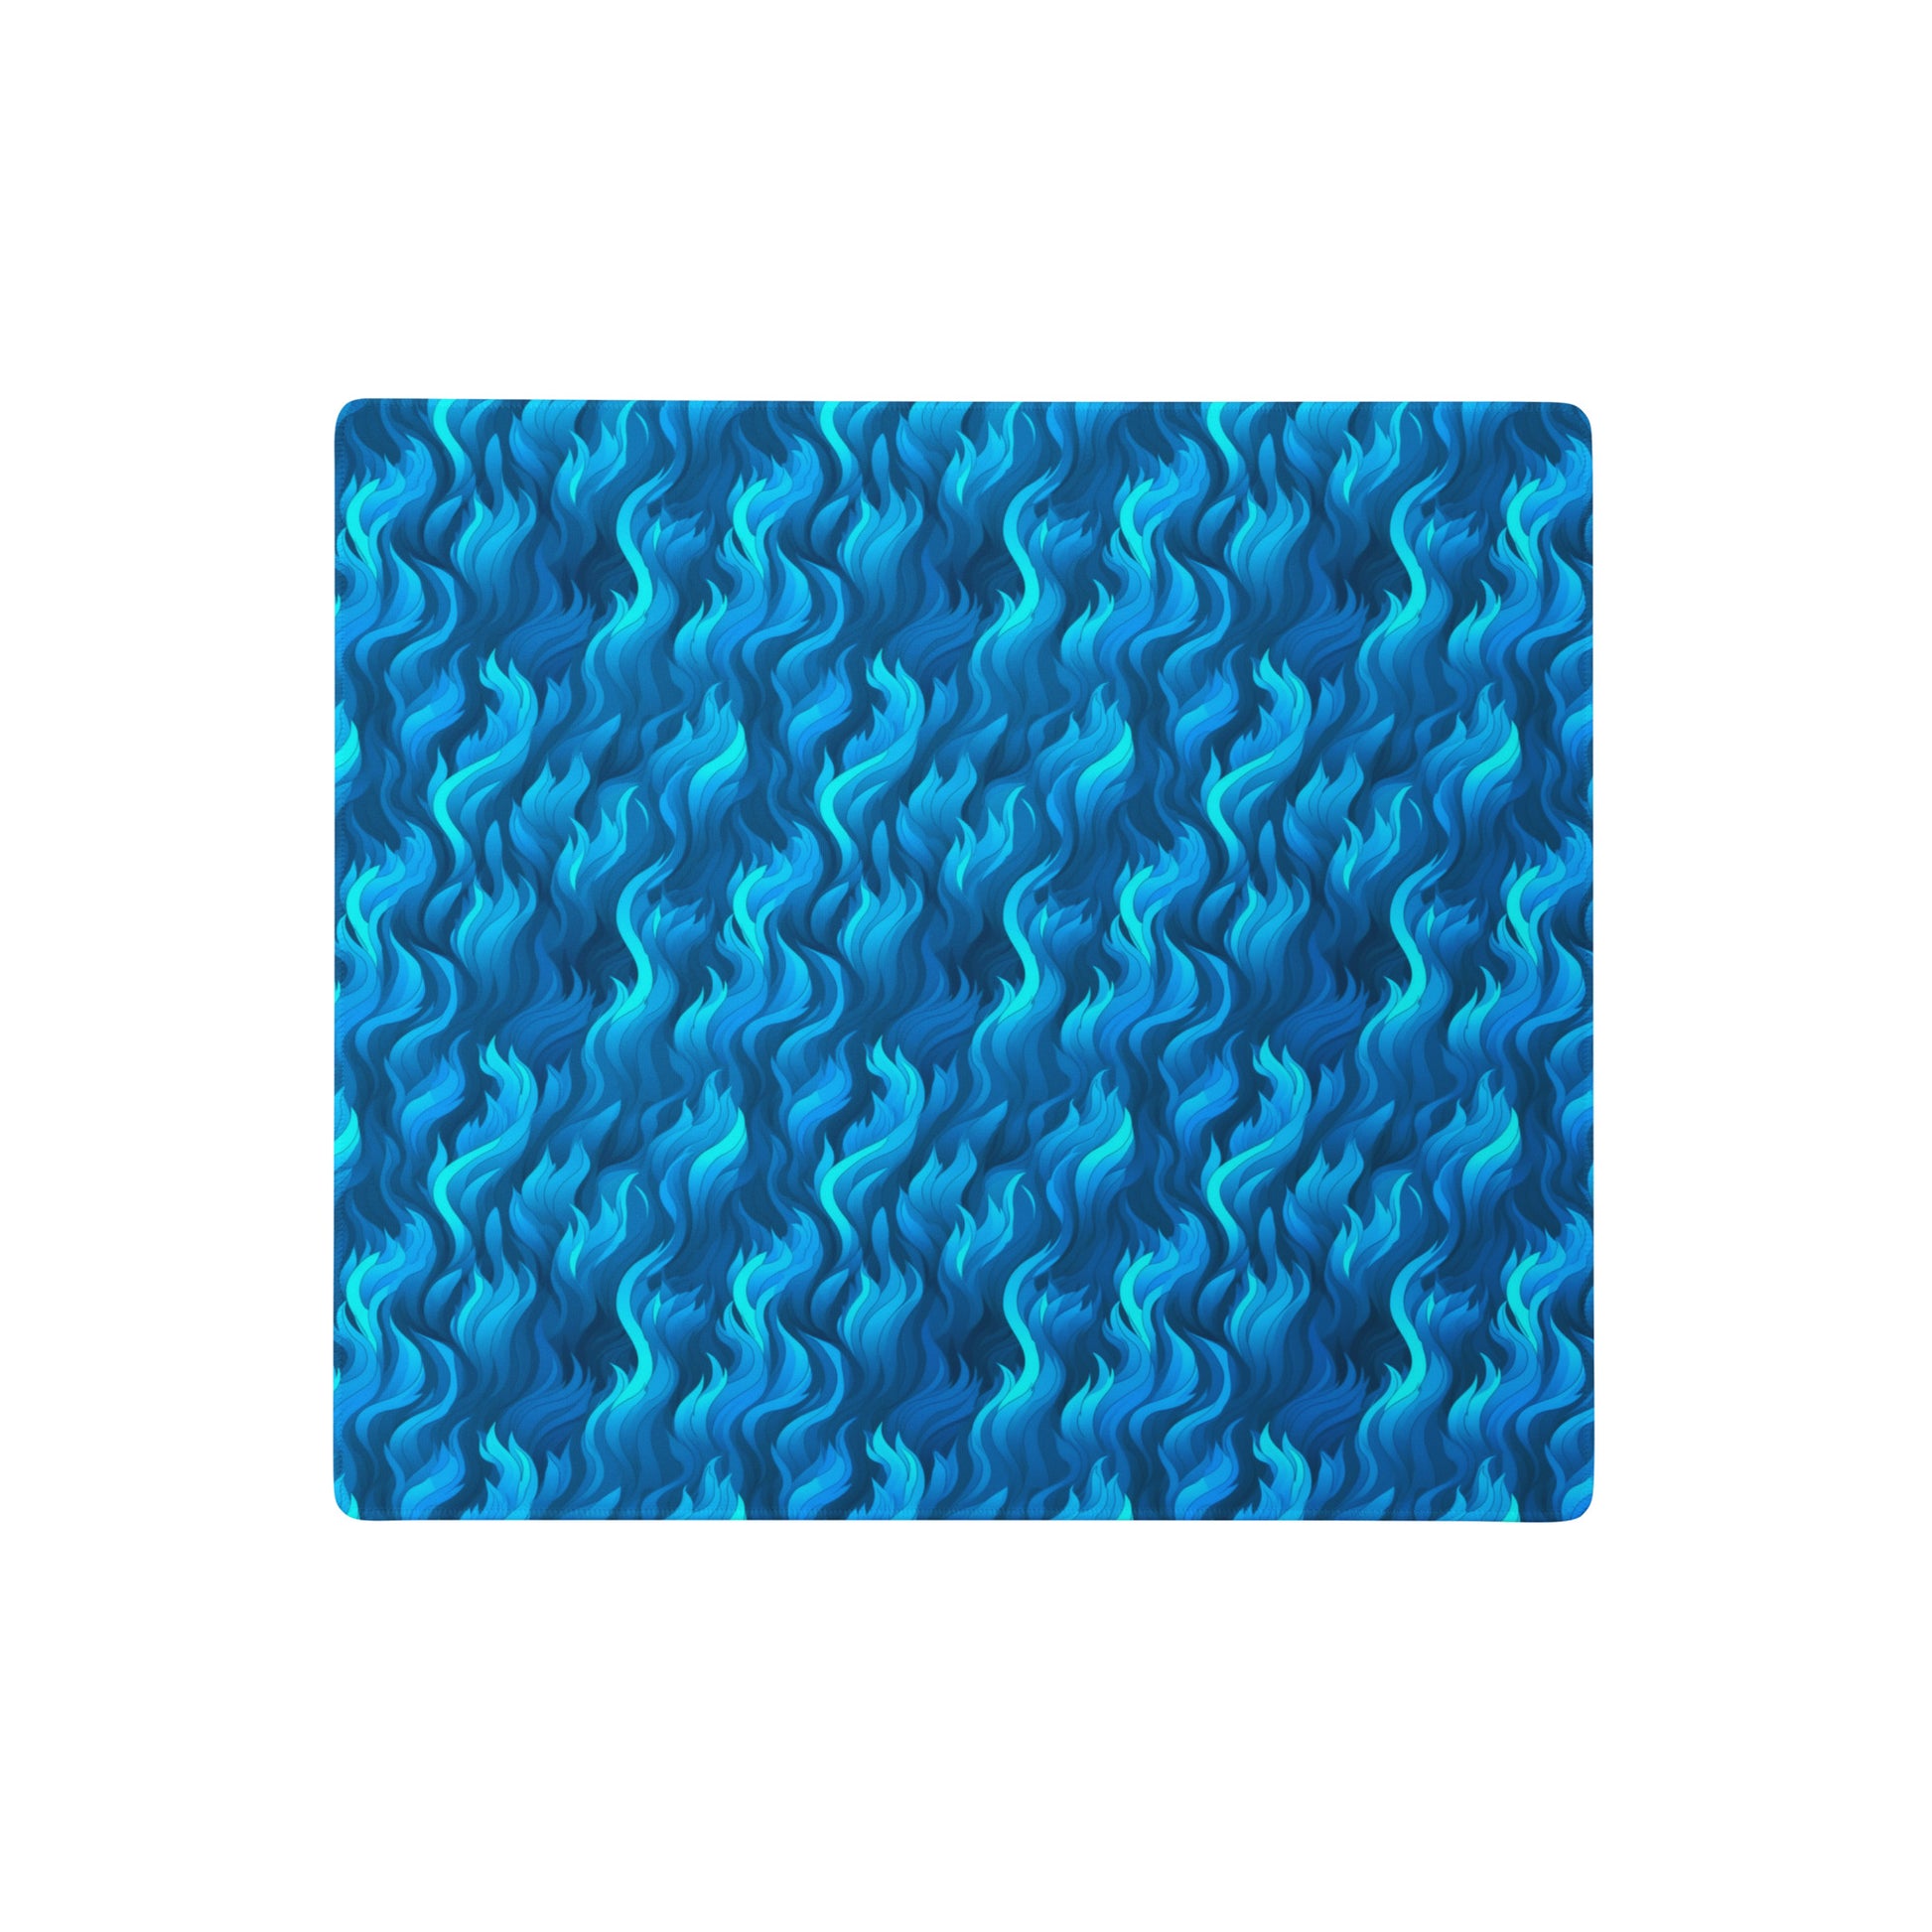 A 18" x 16" desk pad with a wavy flame pattern on it. Blue in color.